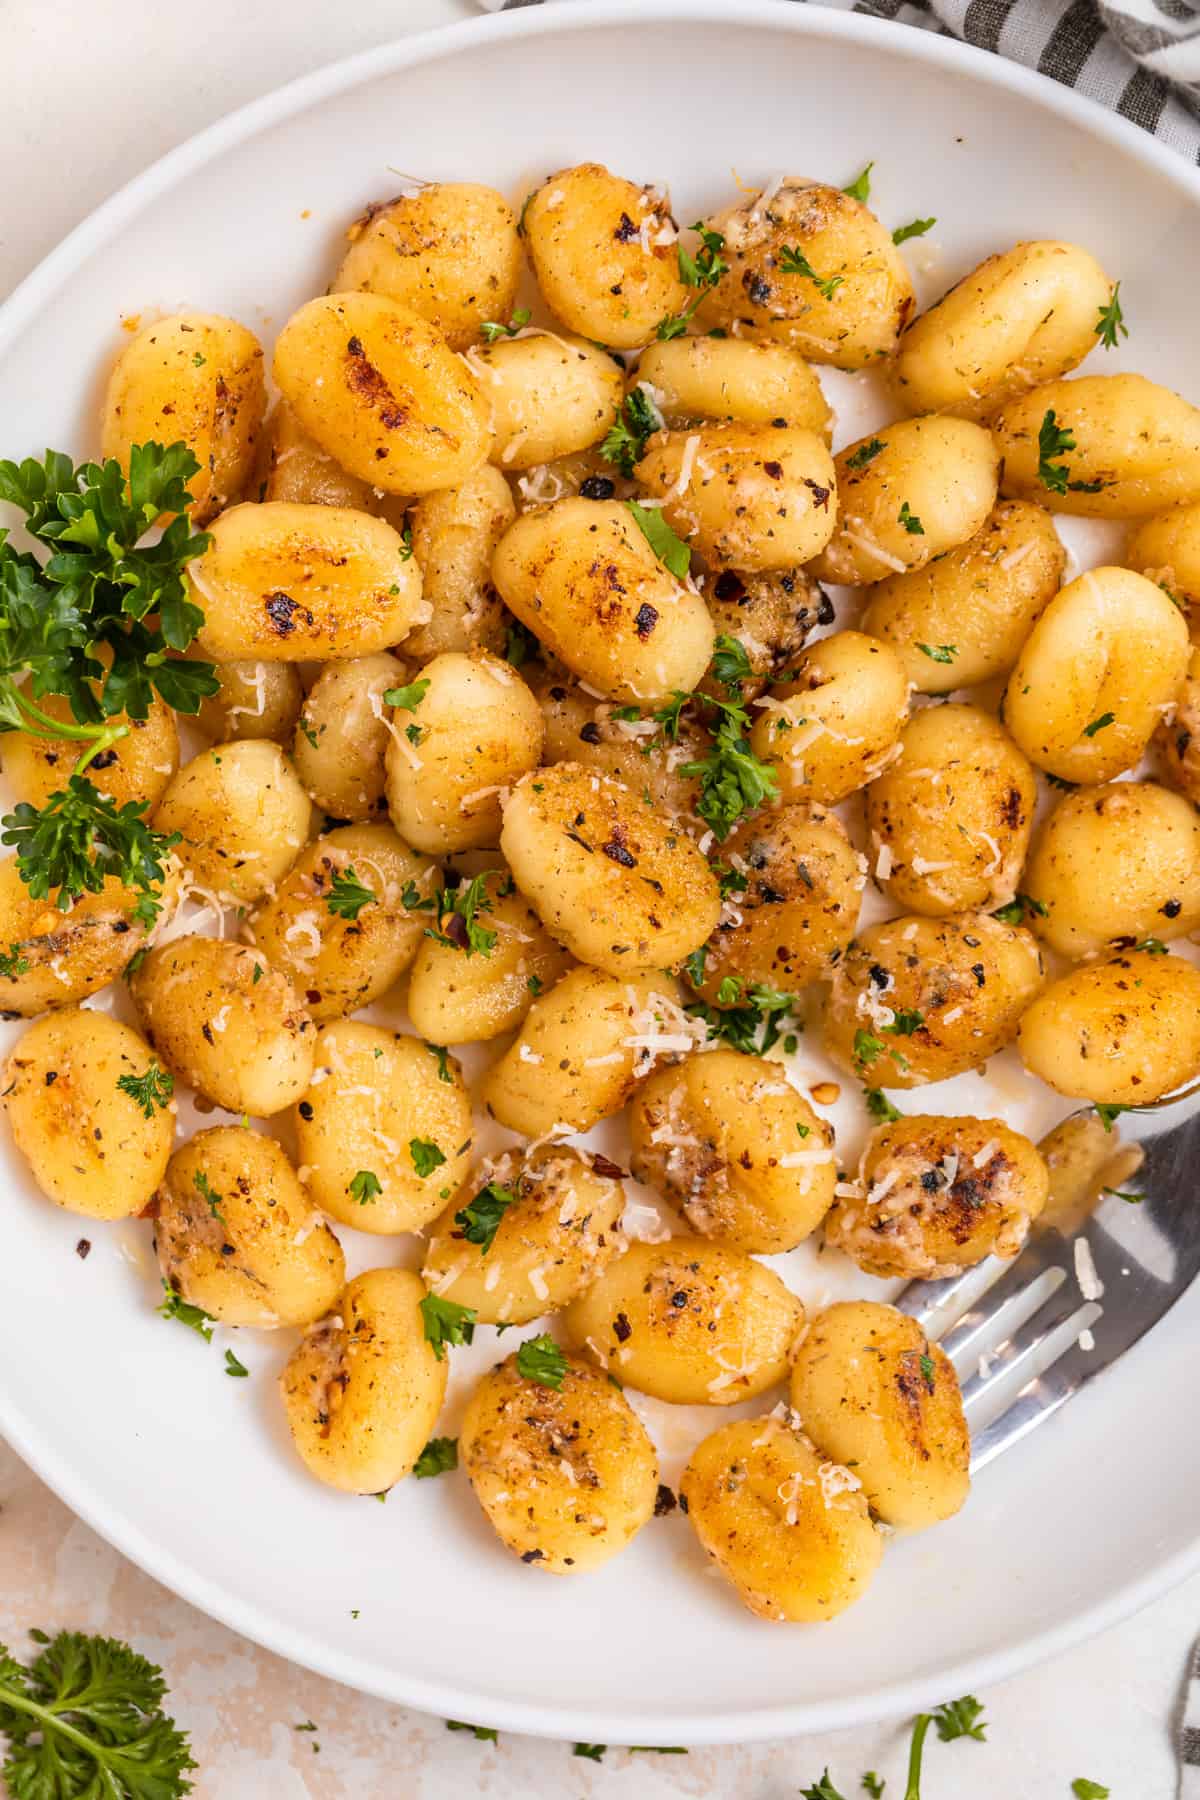 Overhead view of white plate with fried gnocchi topped with fresh parmesan and parsley.